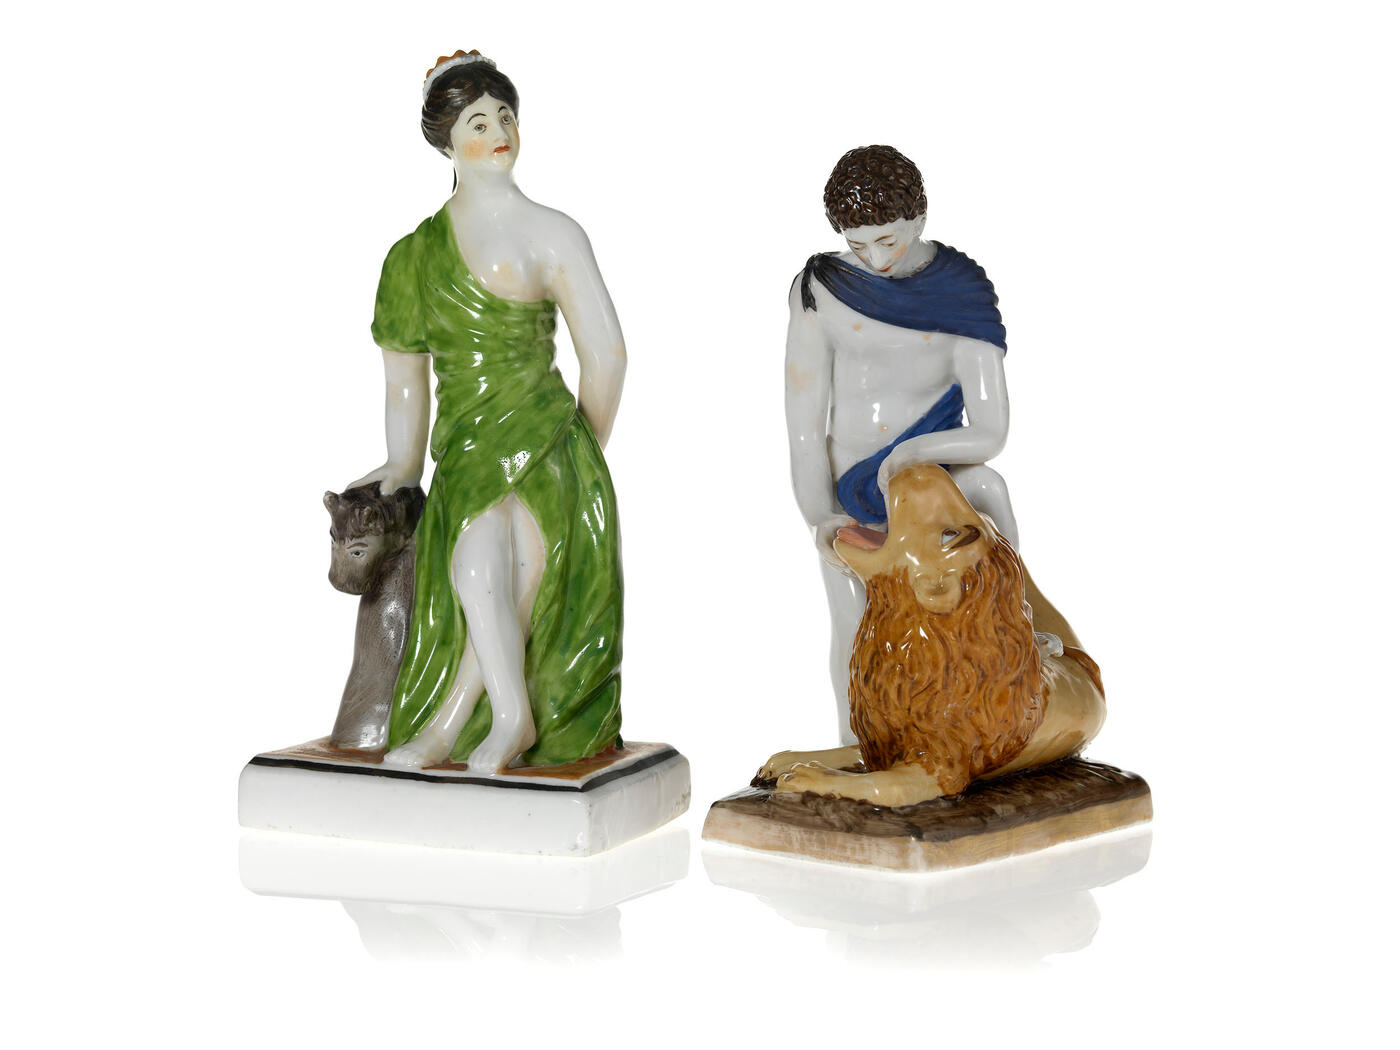 Two Porcelain Figurines of Samson’s Fight with a Lion and a Crowned Beauty with a Horse Head